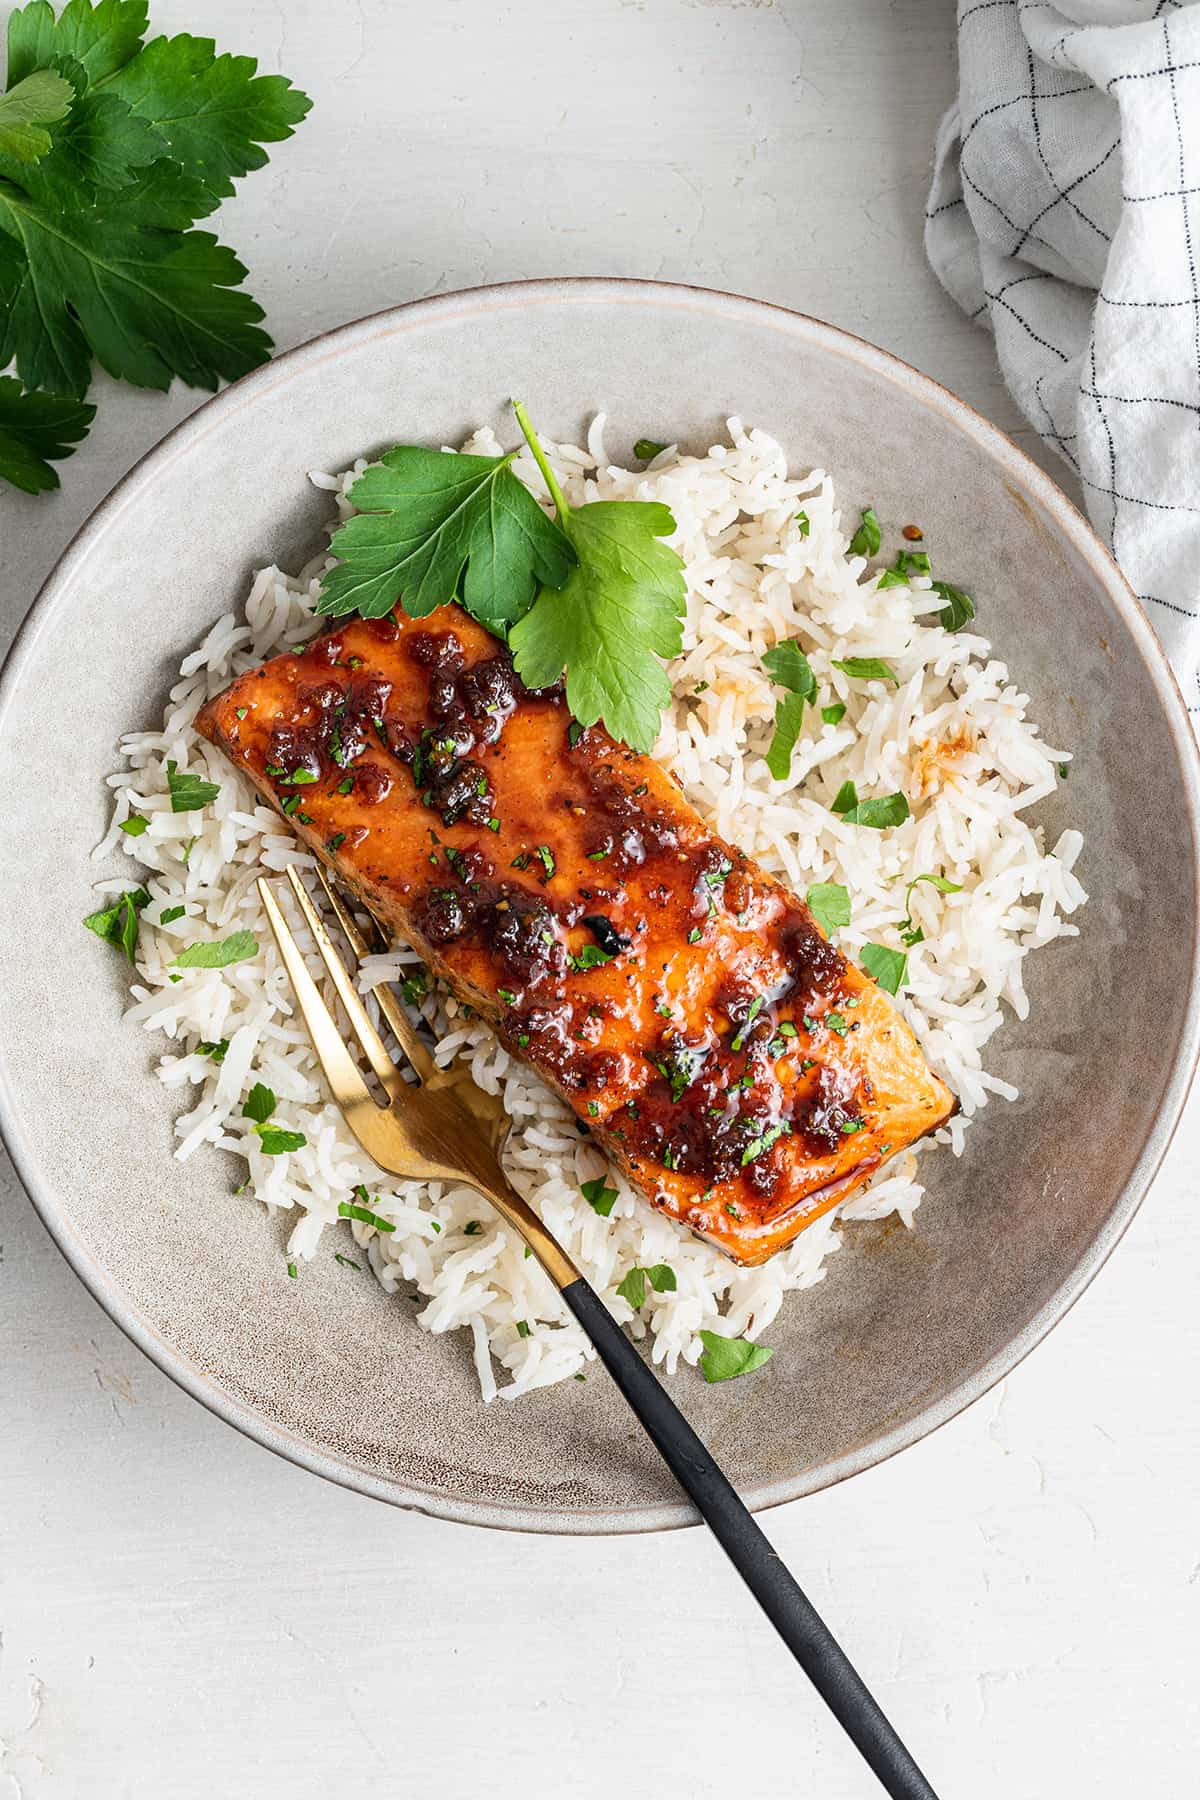 Overhead view of a fillet of honey glazed salmon on top of a bed of cilantro rice, with a fork